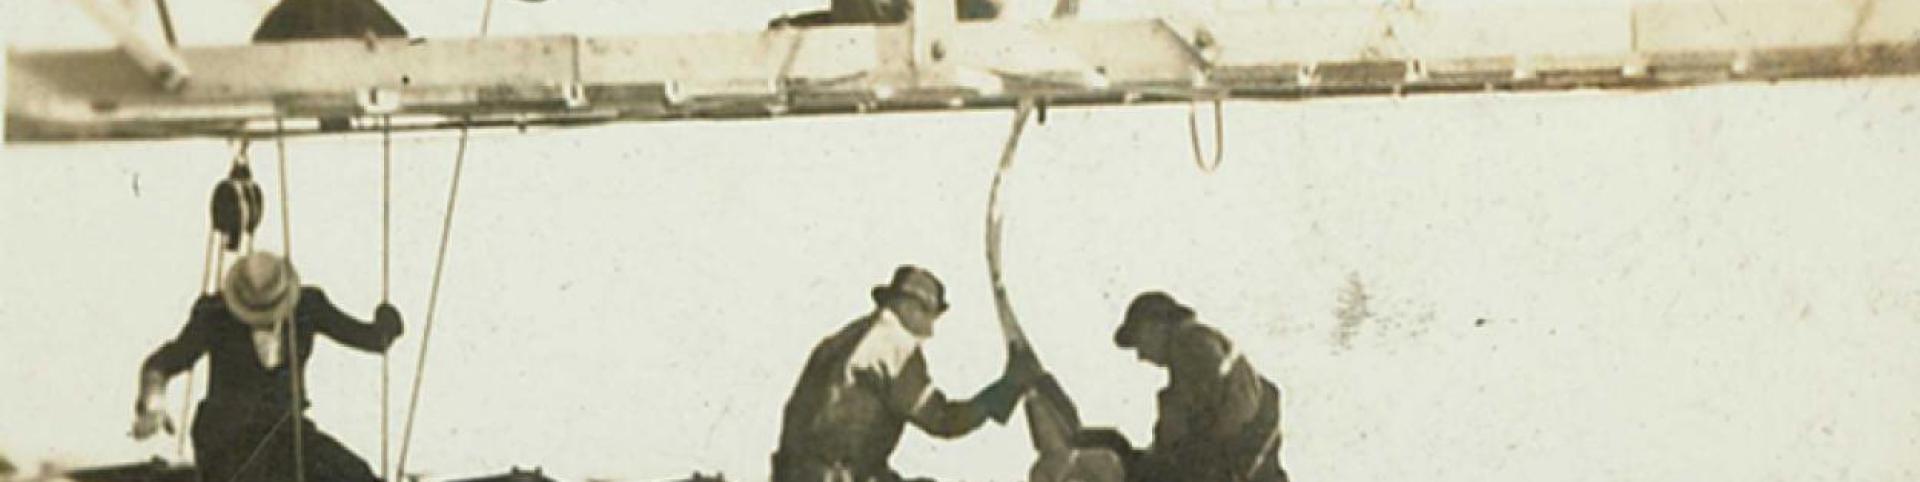 A grainy black and white photo of men working construction.